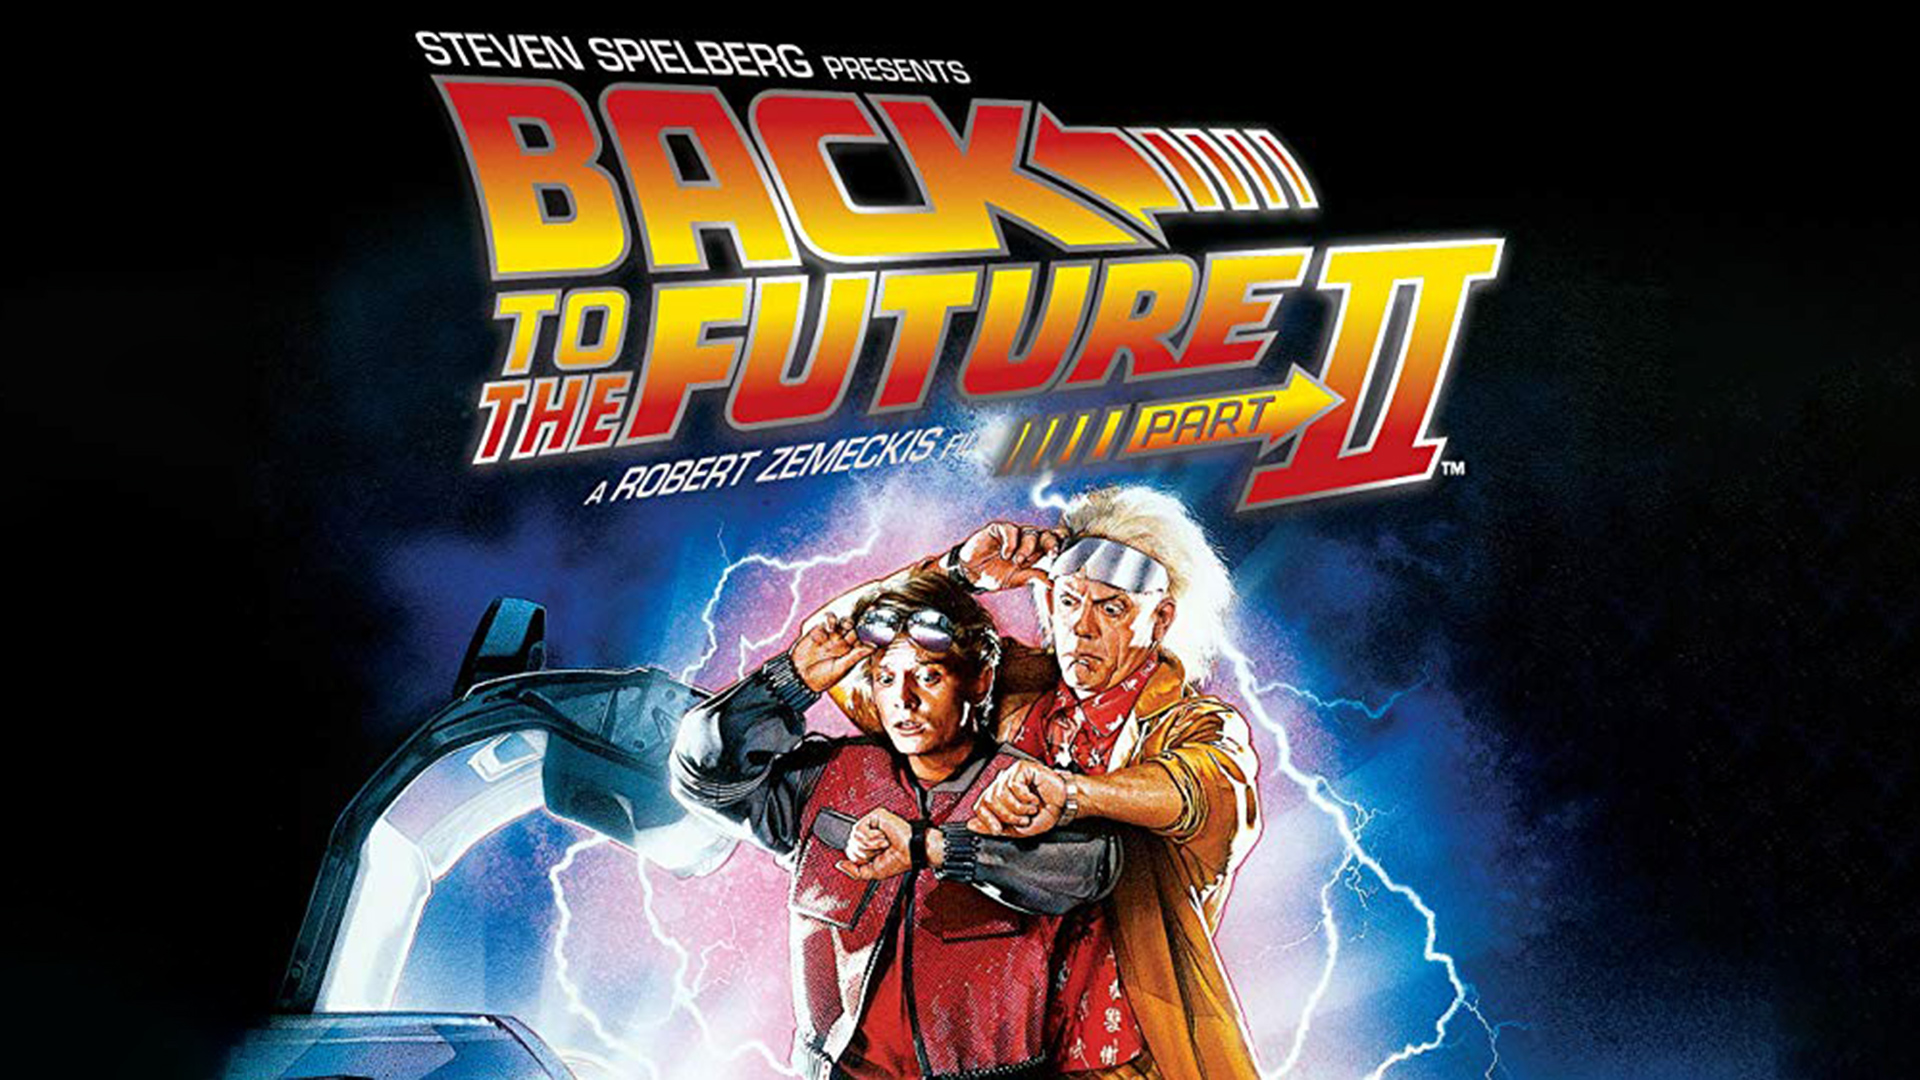 Back to the Future 2 was groundbreaking, and it still